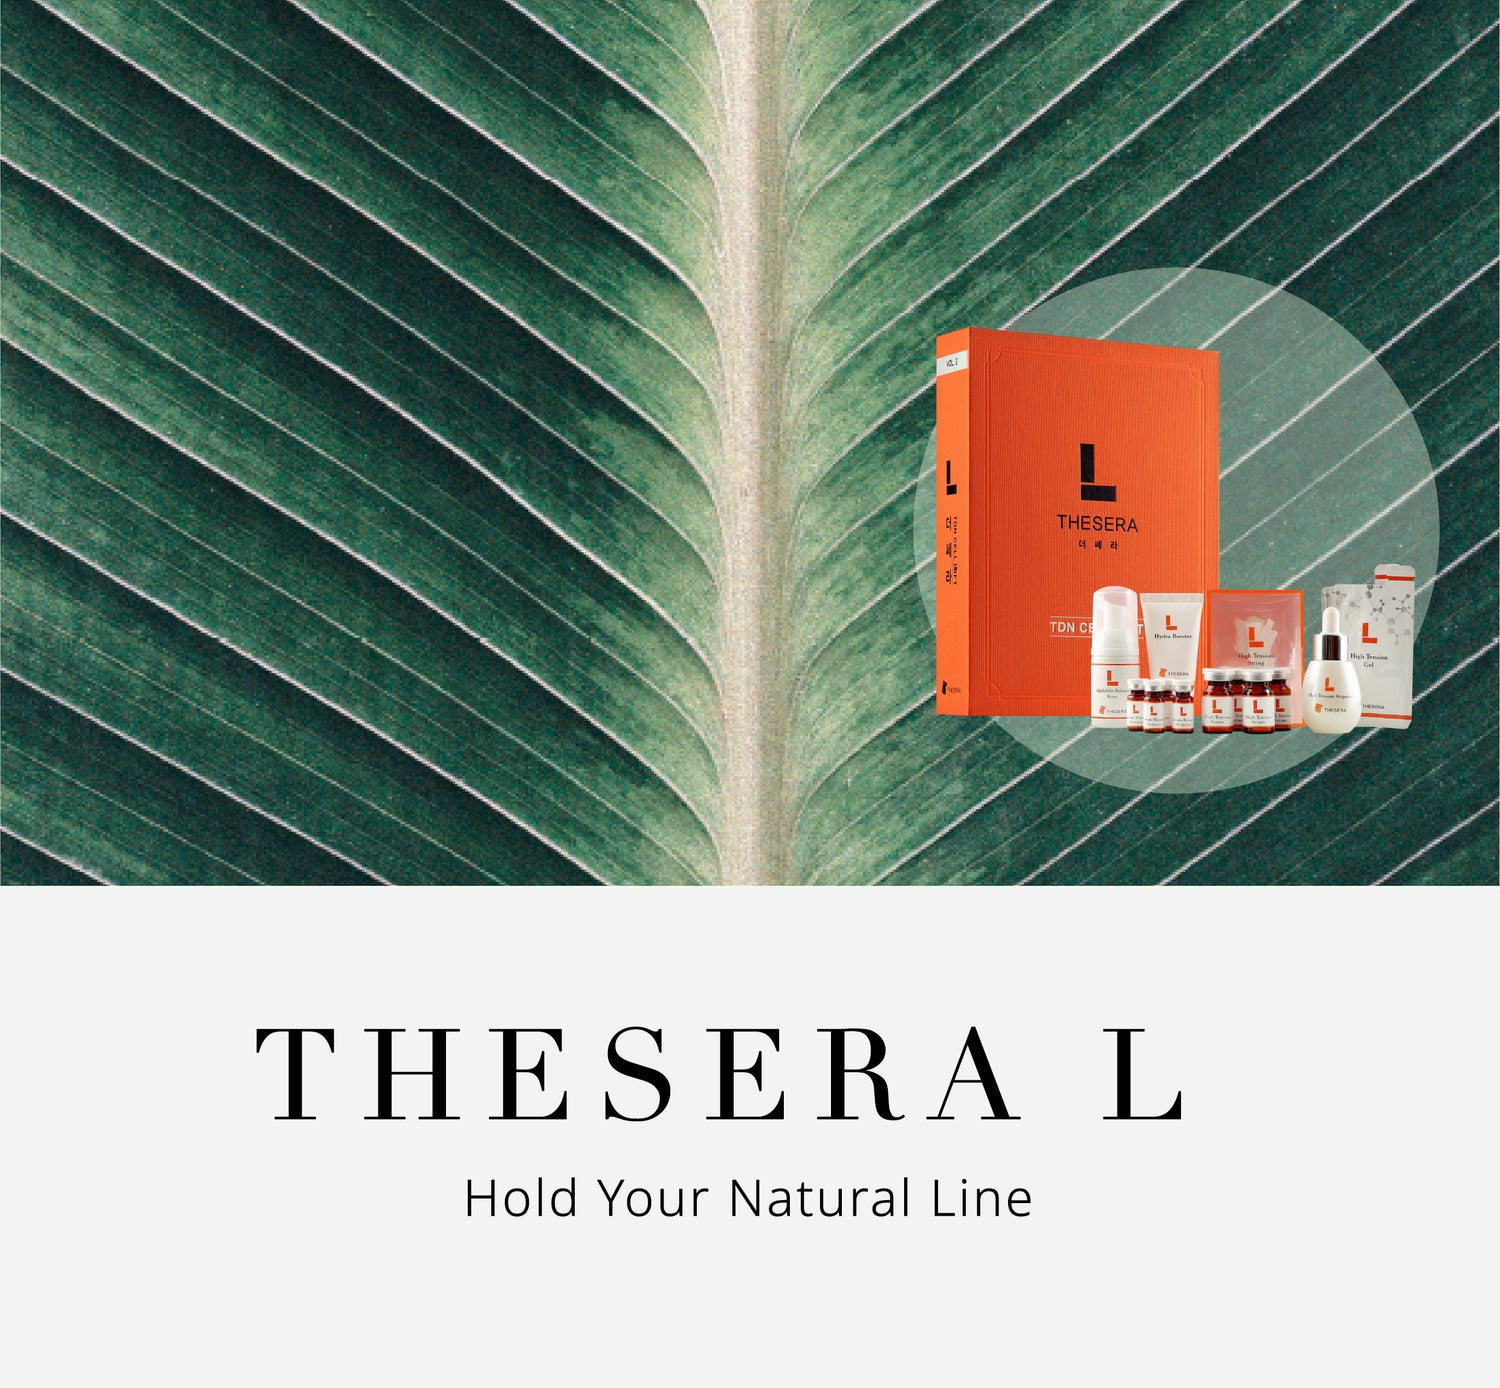 THESERA L – Hold Your Natural Line